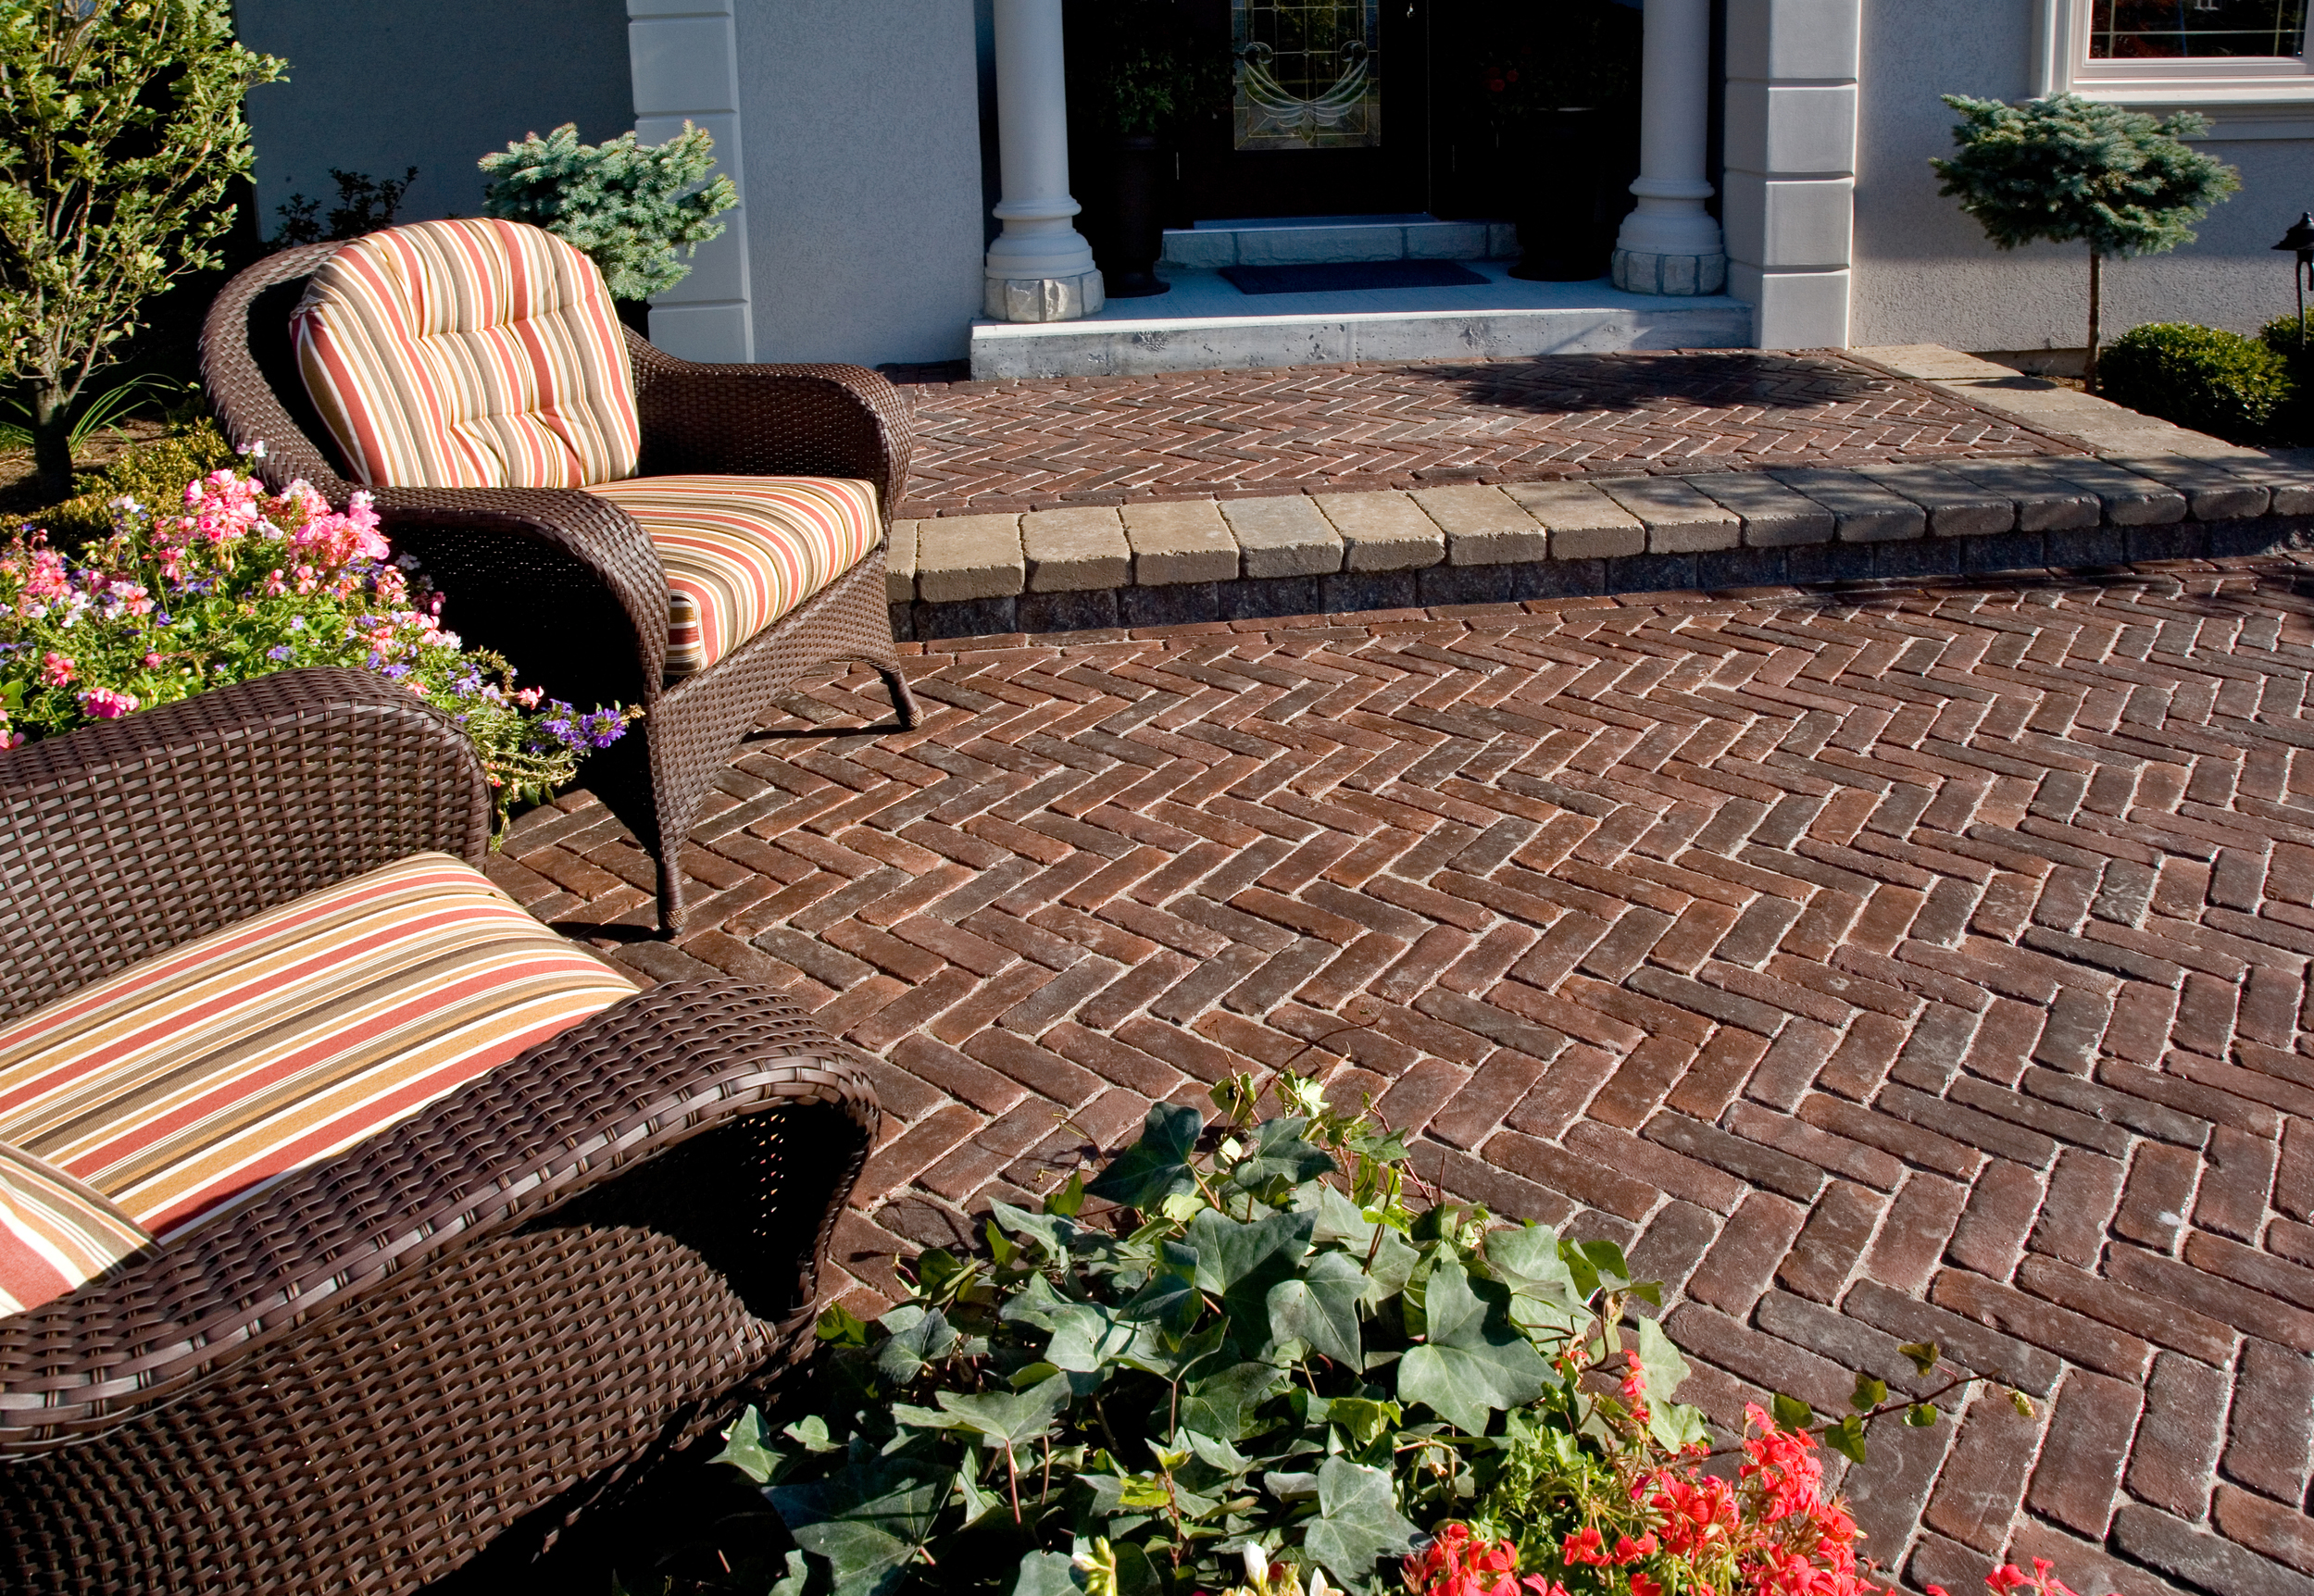 Interlocking stone is a very popular landscaping option